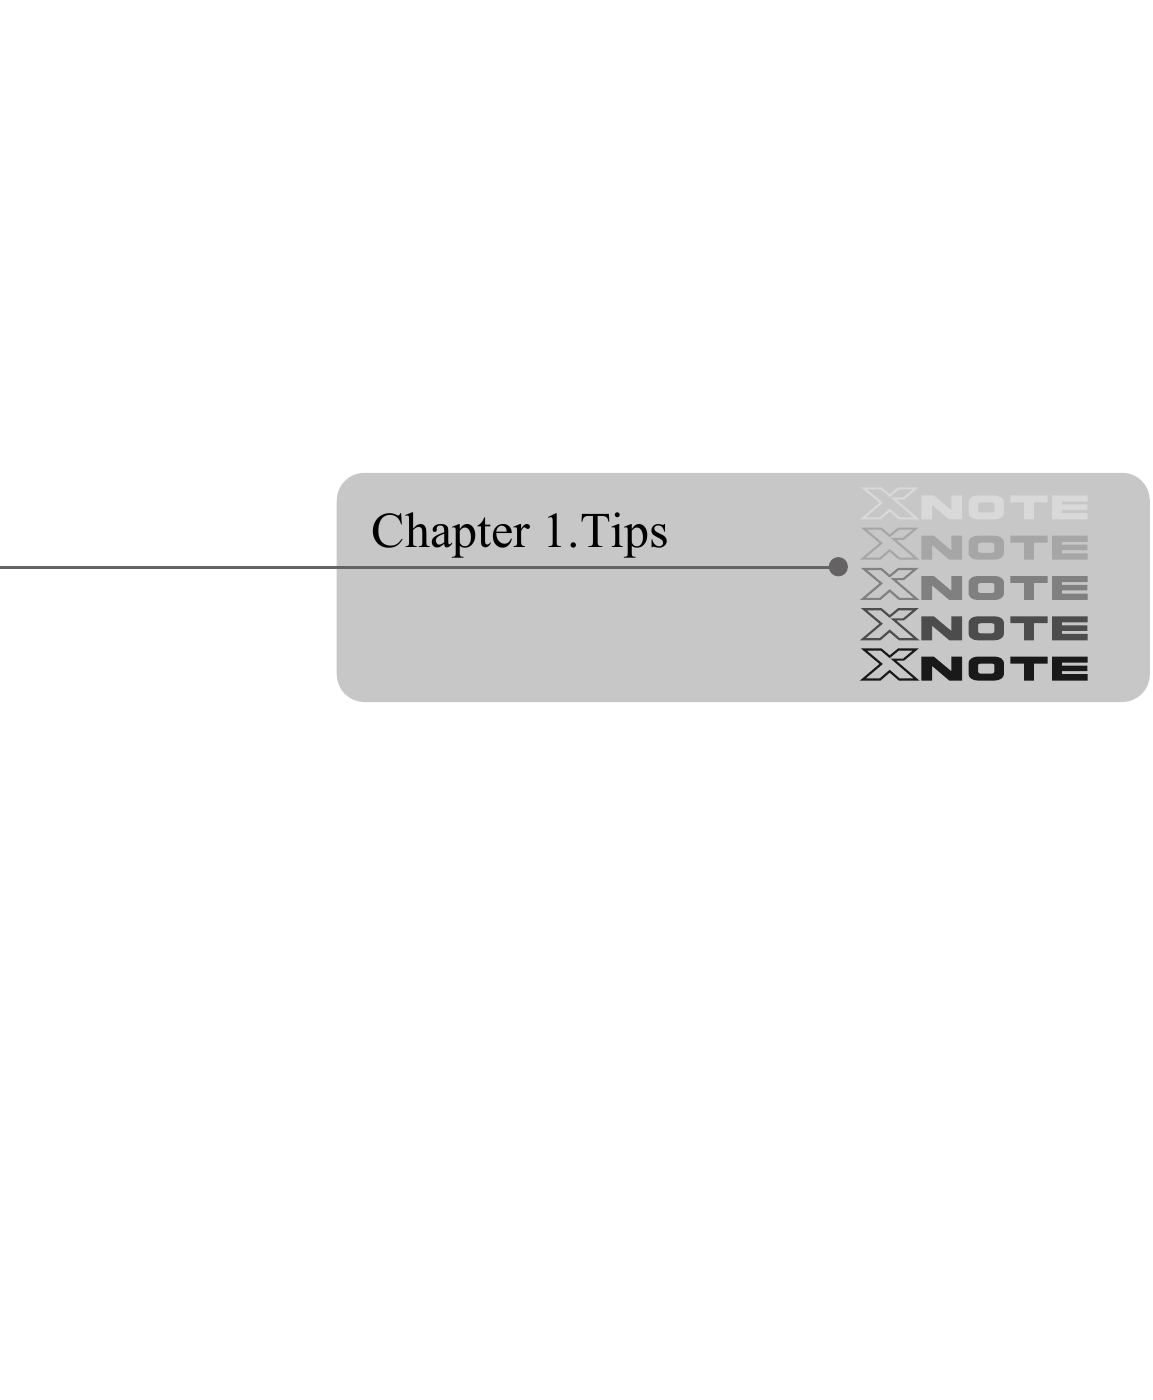  Chapter 1.Tips